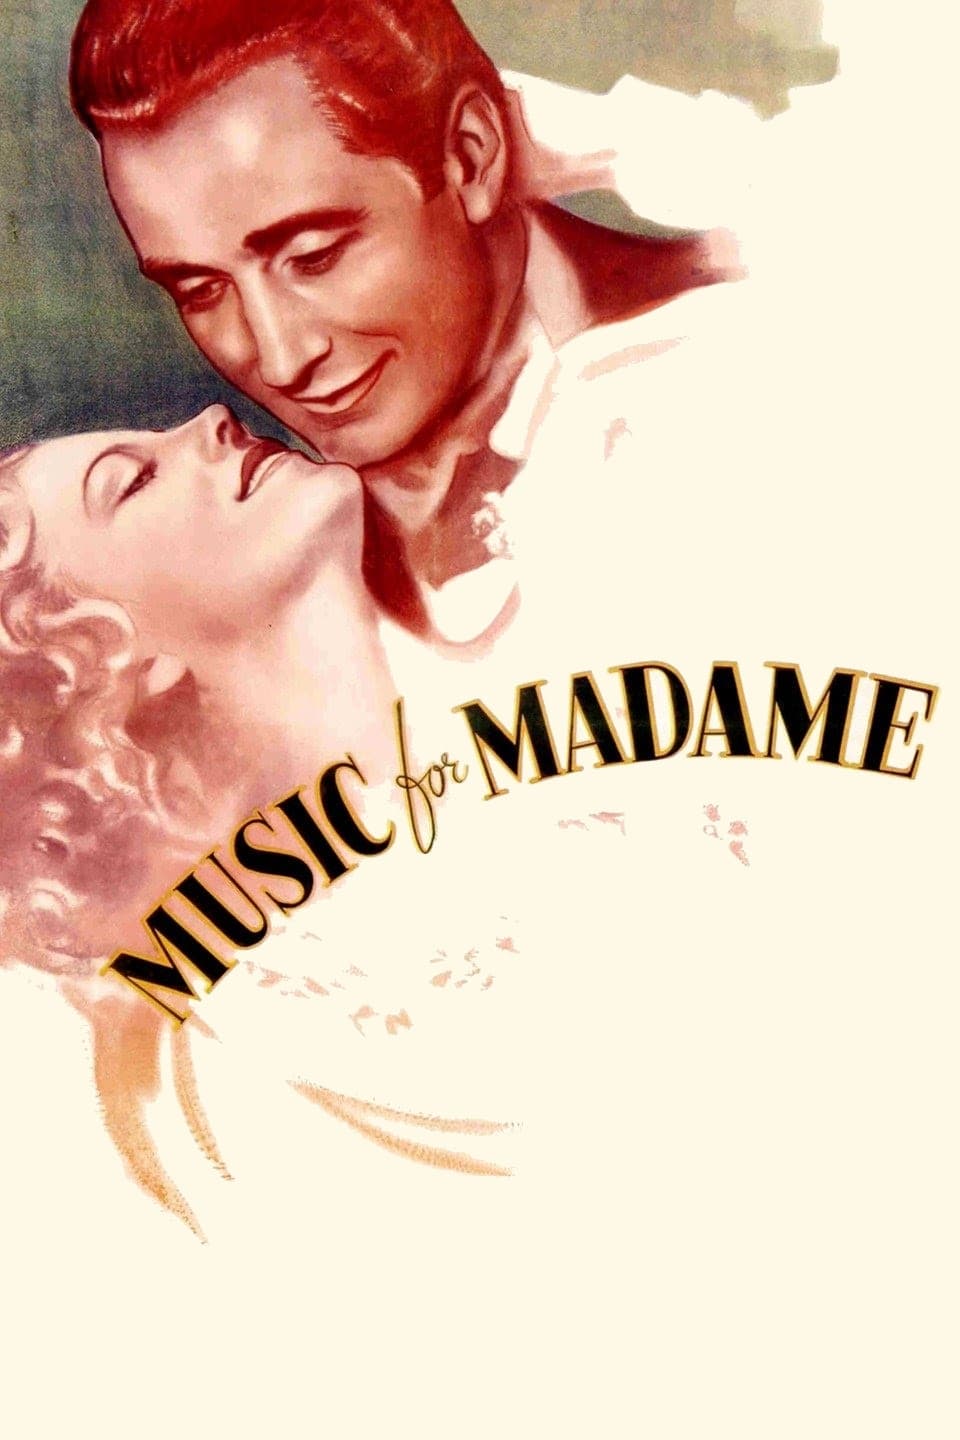 Music for Madame (1937)